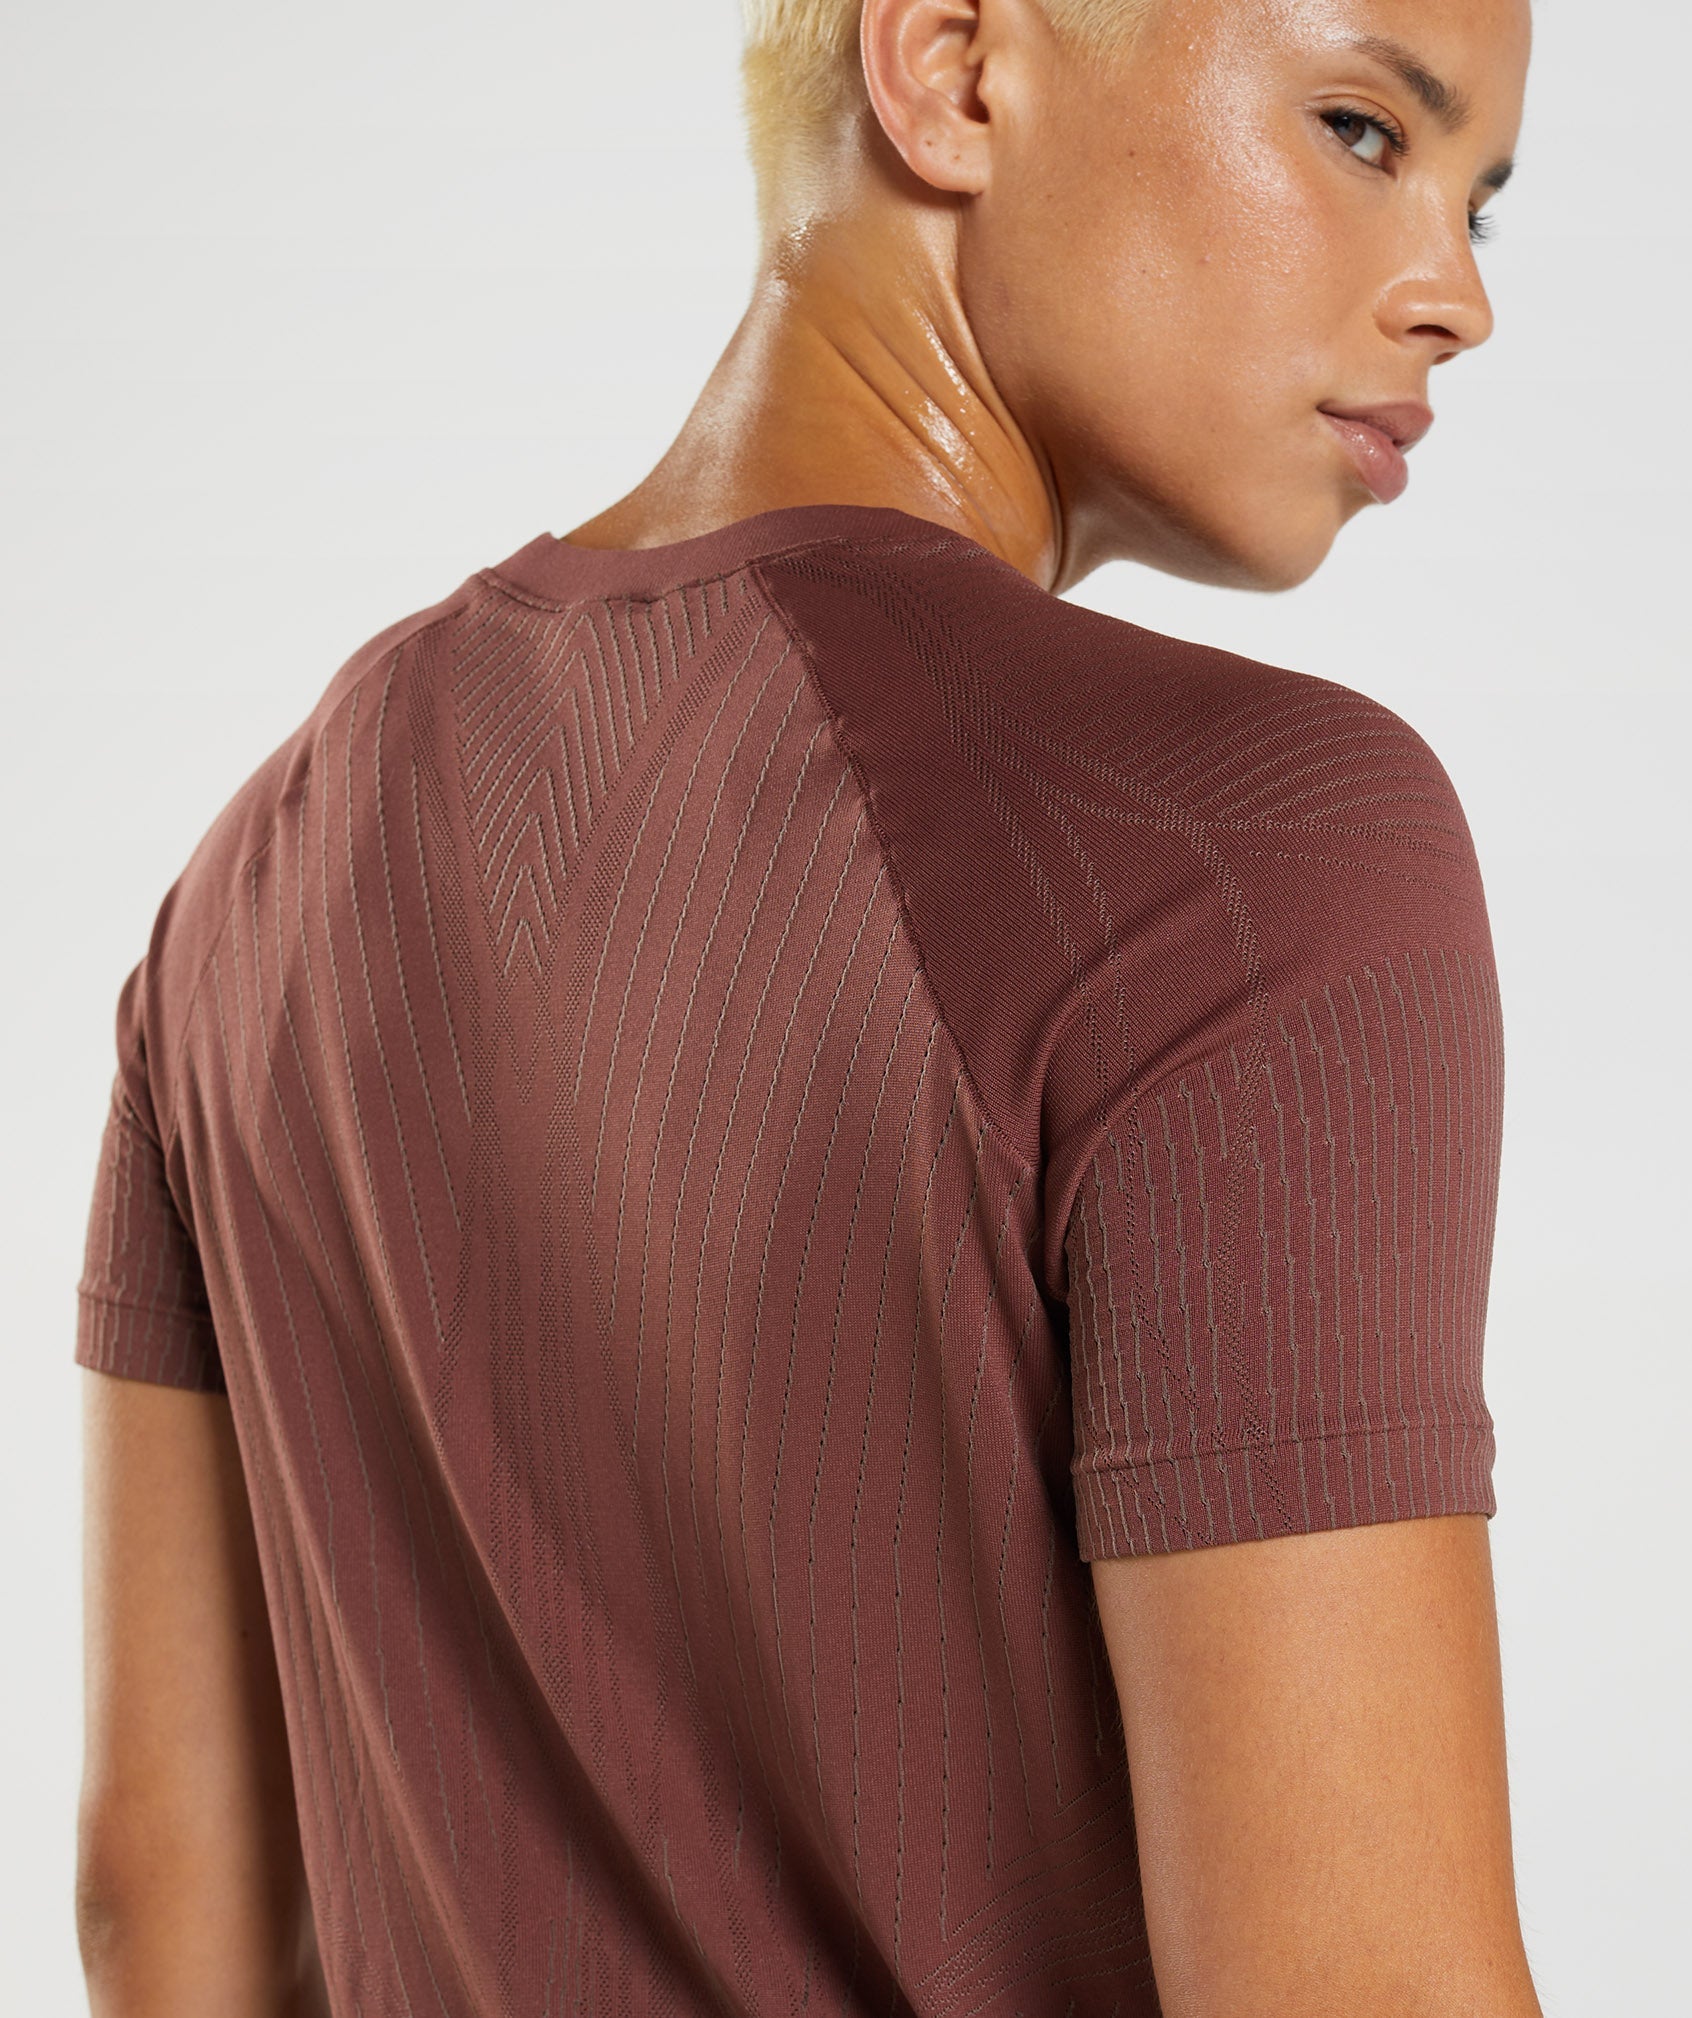 Apex Seamless Top in Cherry Brown/Truffle Brown - view 5